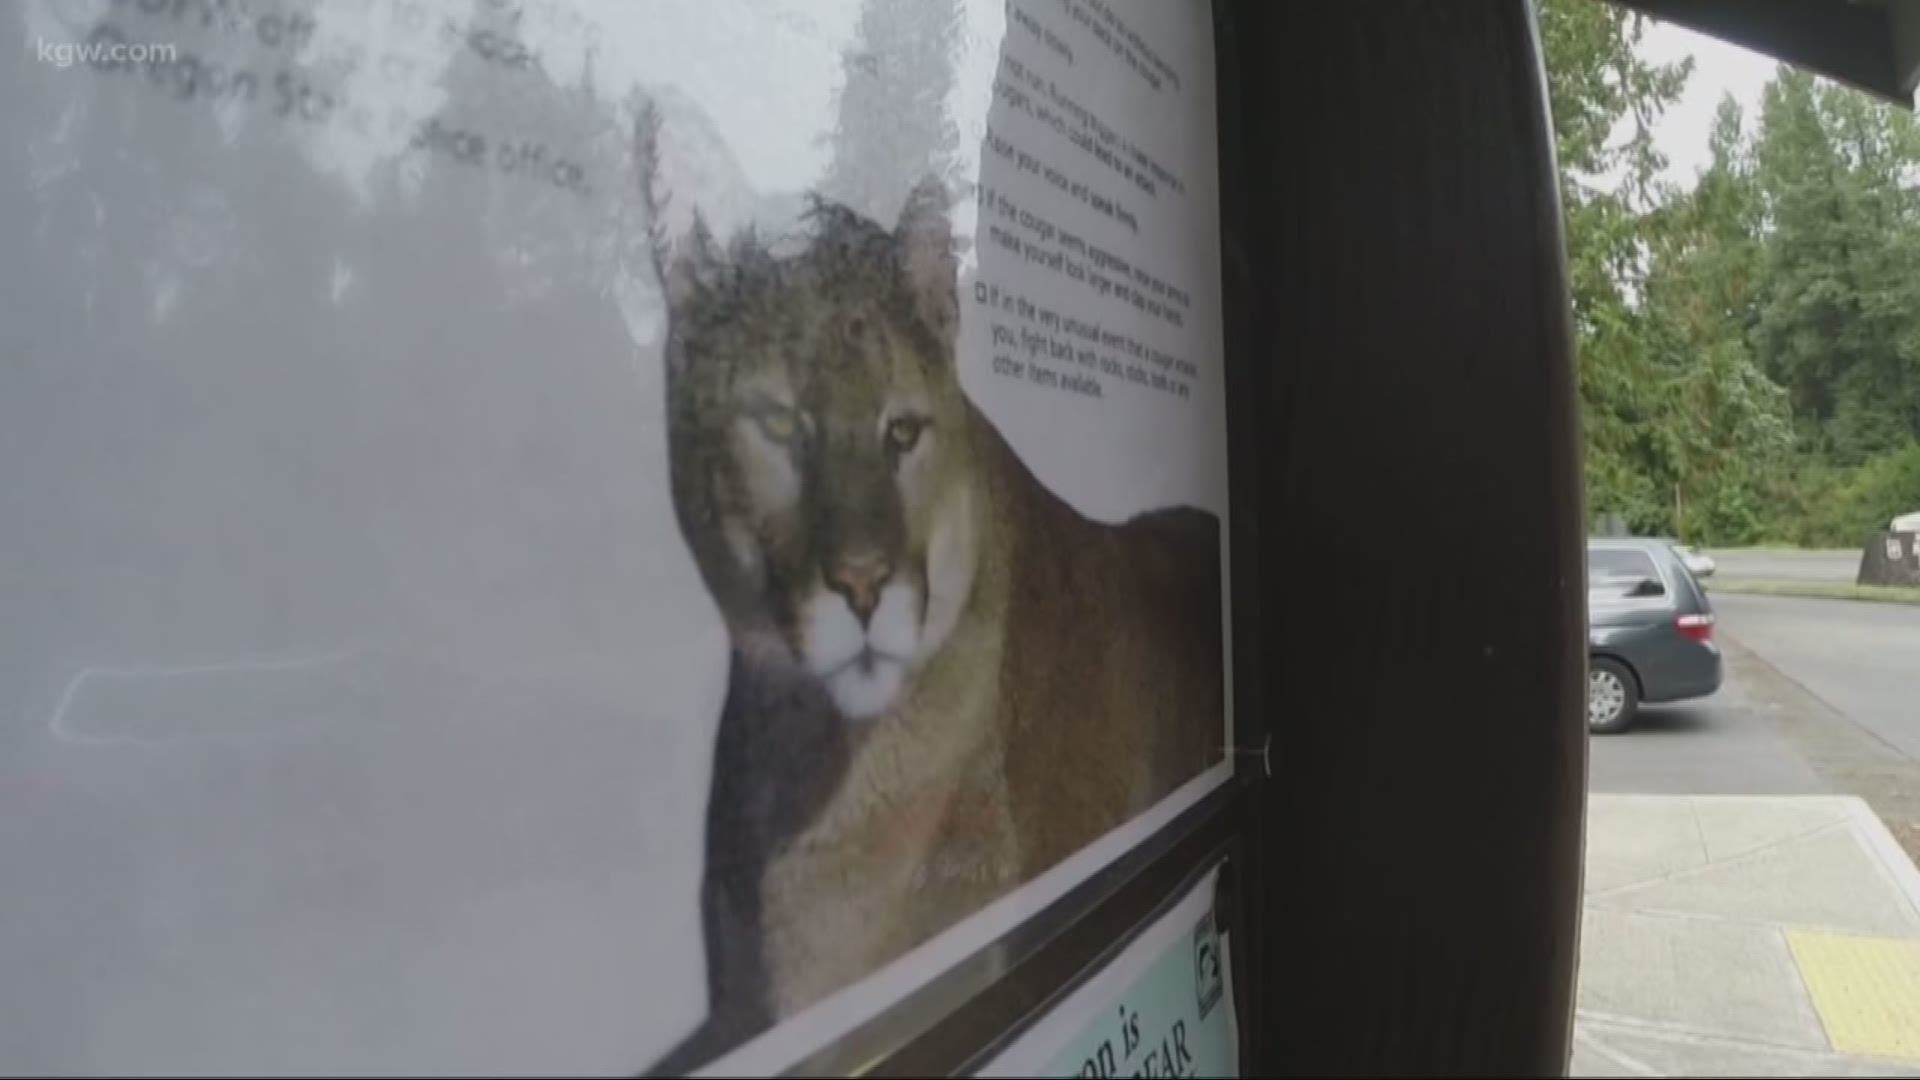 An Oregon Department of Fish and Wildlife spokesman on Saturday said it is a "strong possibility" the cougar officials shot and killed on Friday was the one believed to have attacked and killed a Gresham woman.